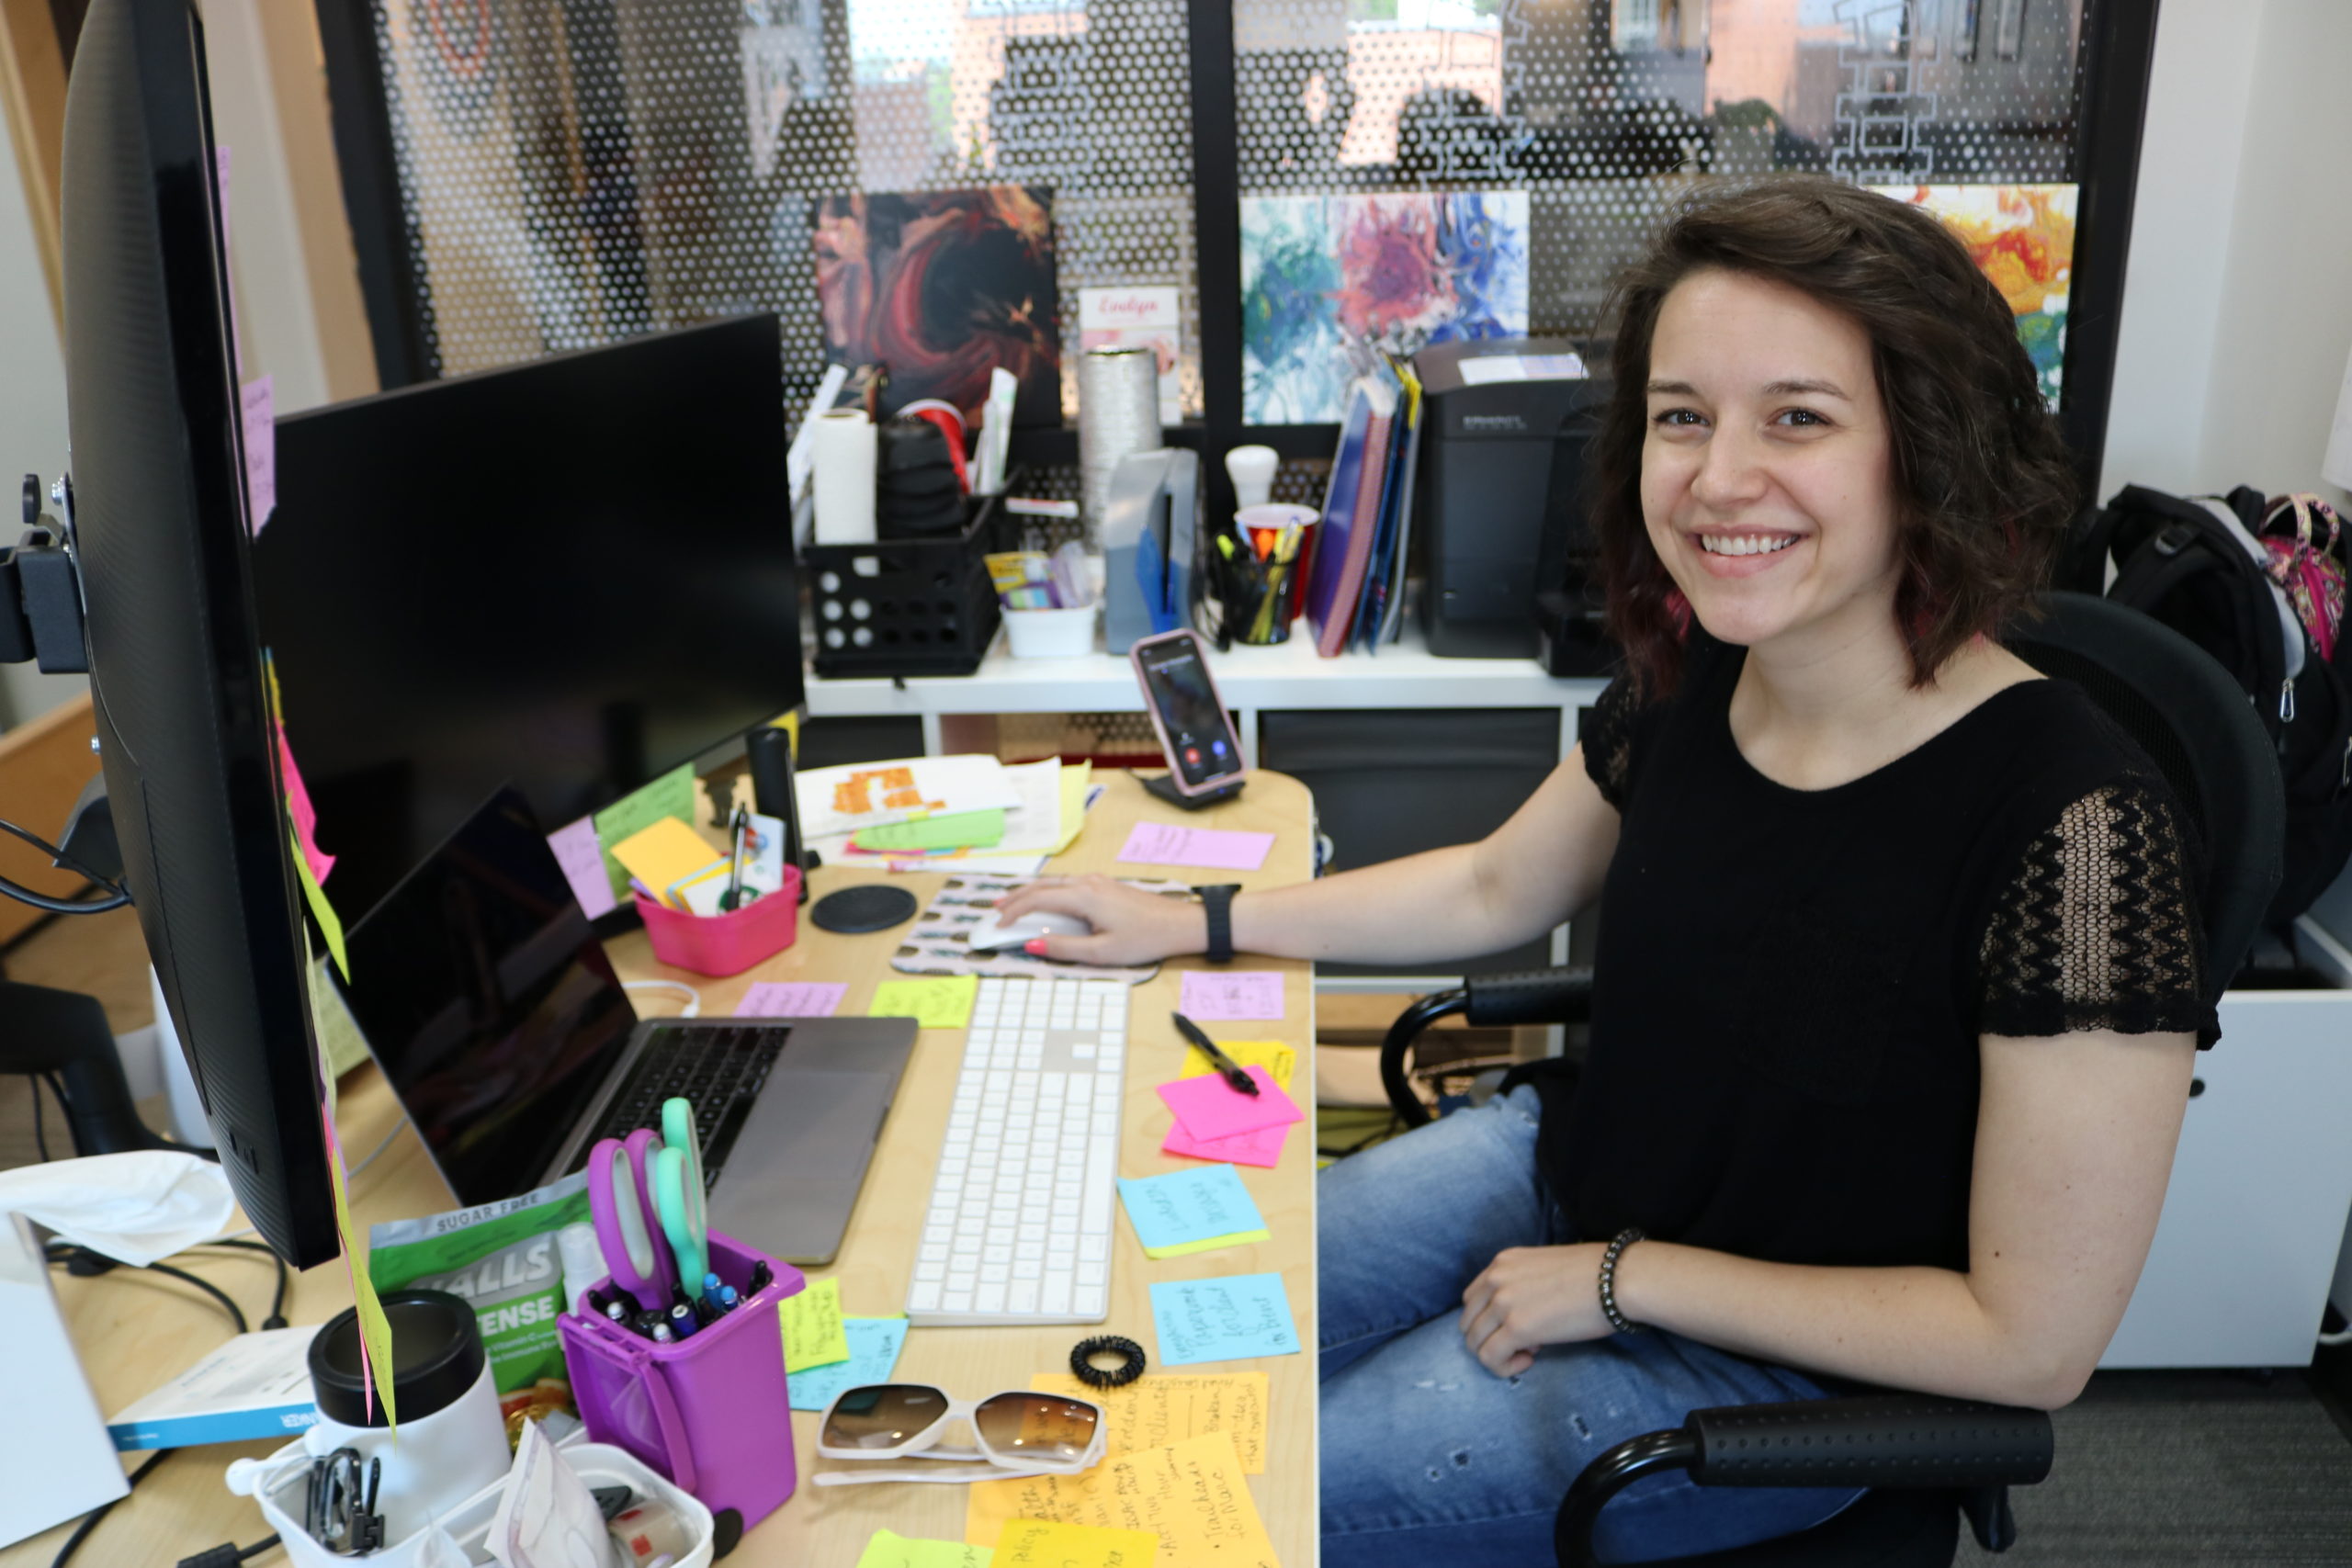 Samantha Young Executive Assistant for Venn Technology sits at her desk